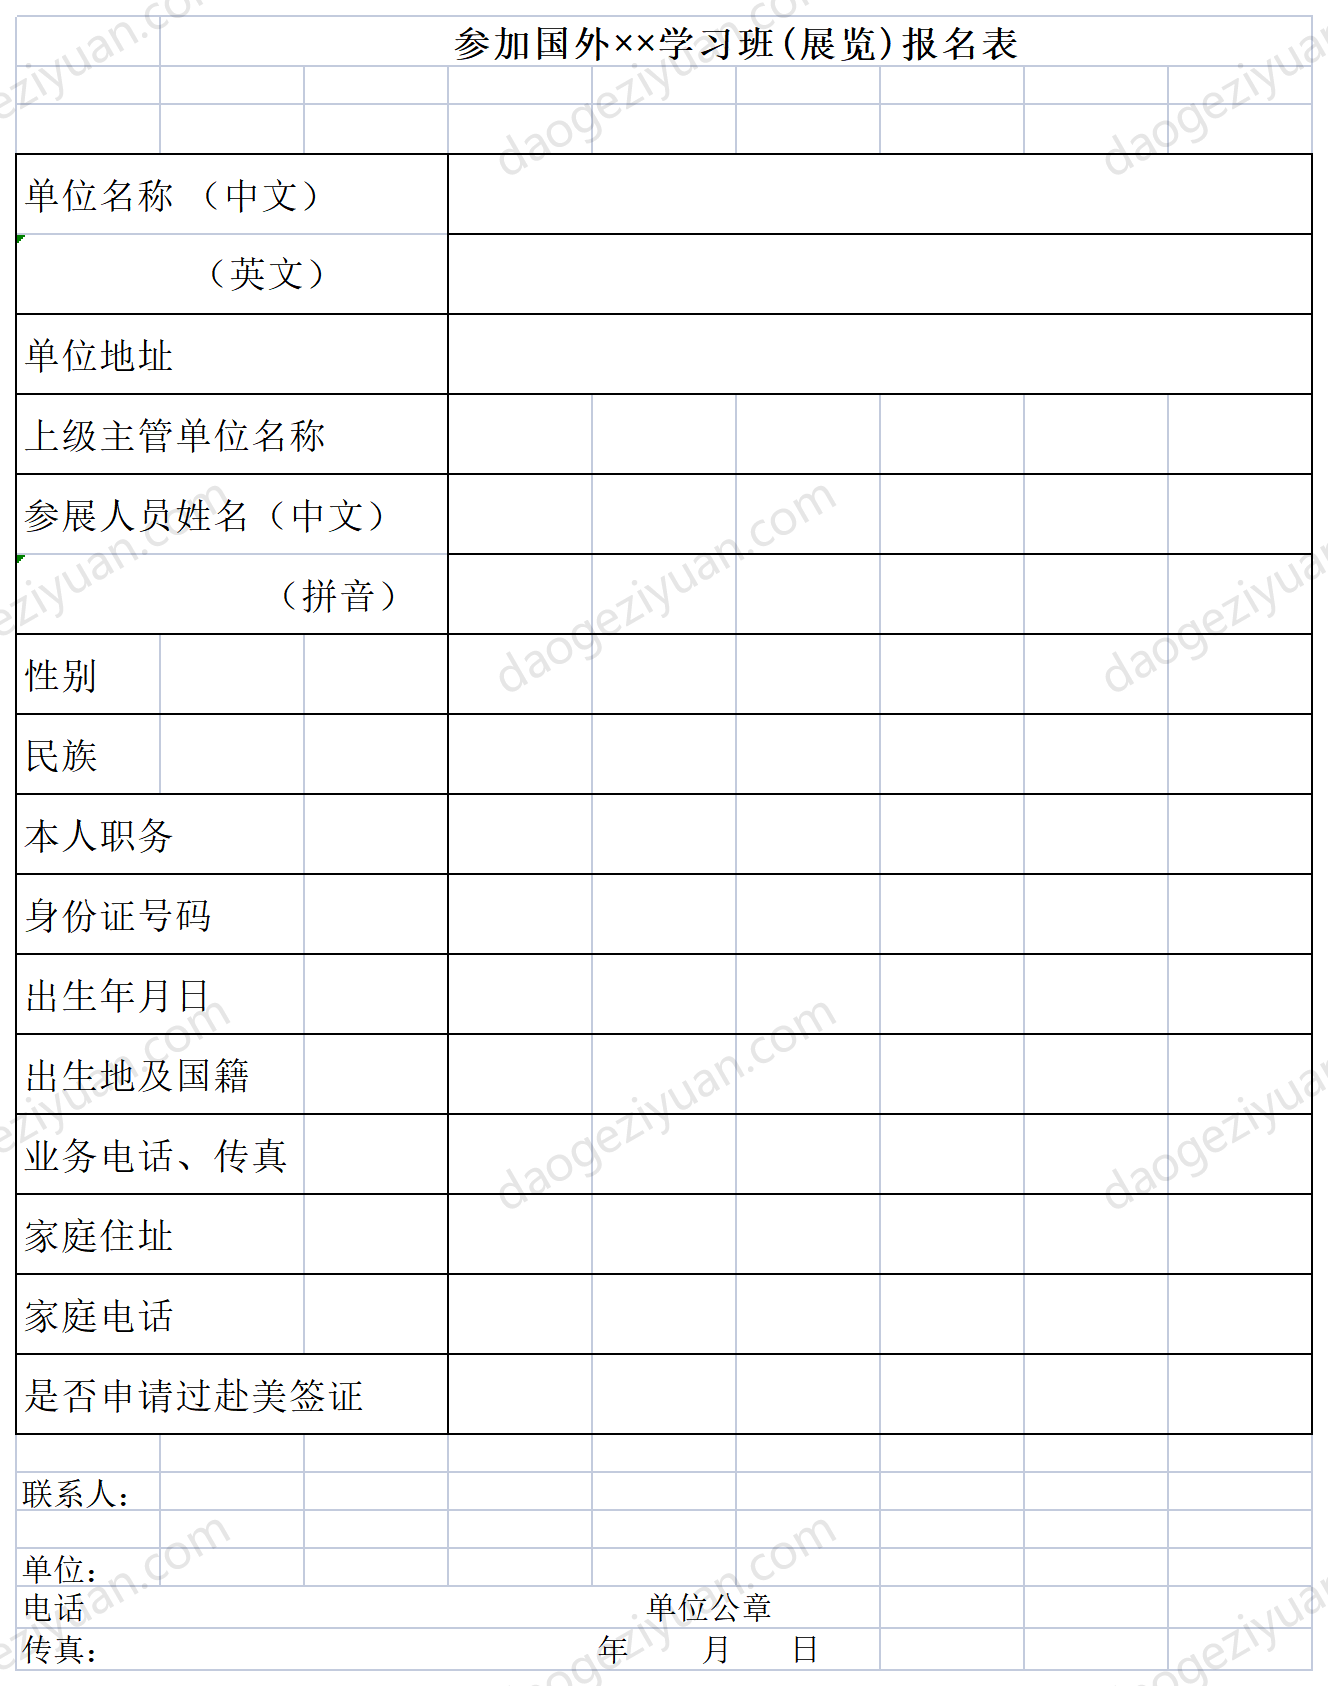 Registration form for participating in foreign study classes (exhibition).xls